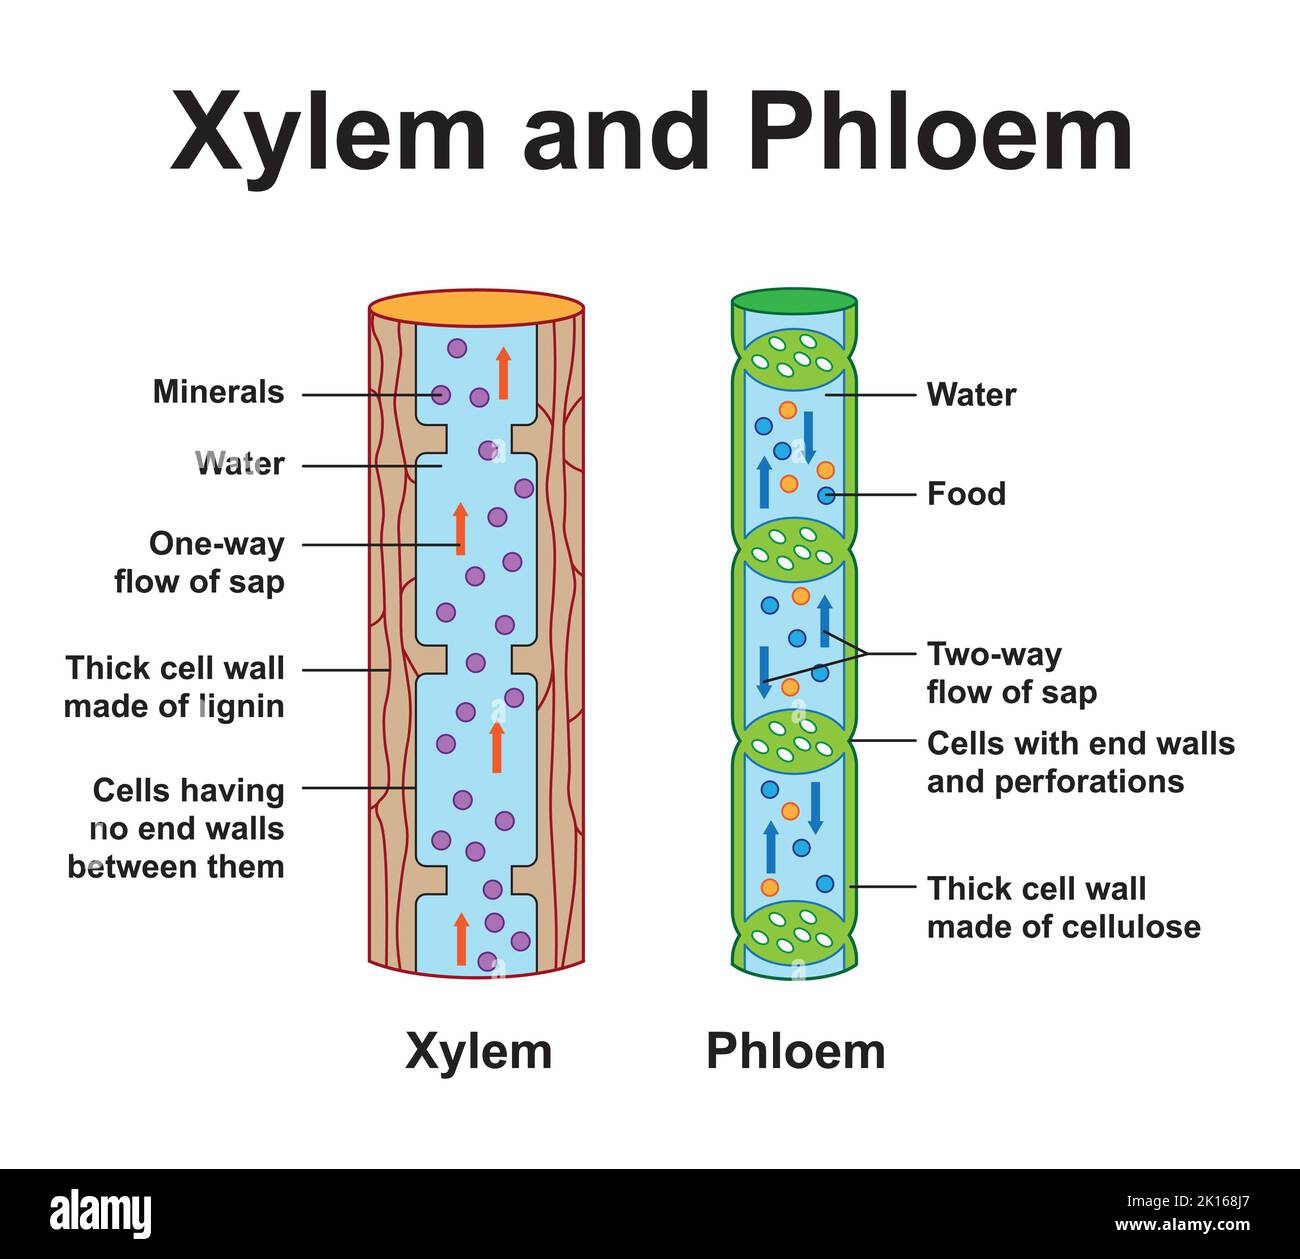 Scientific Designing Of Xylem And Phloem Scheme Labeled Water